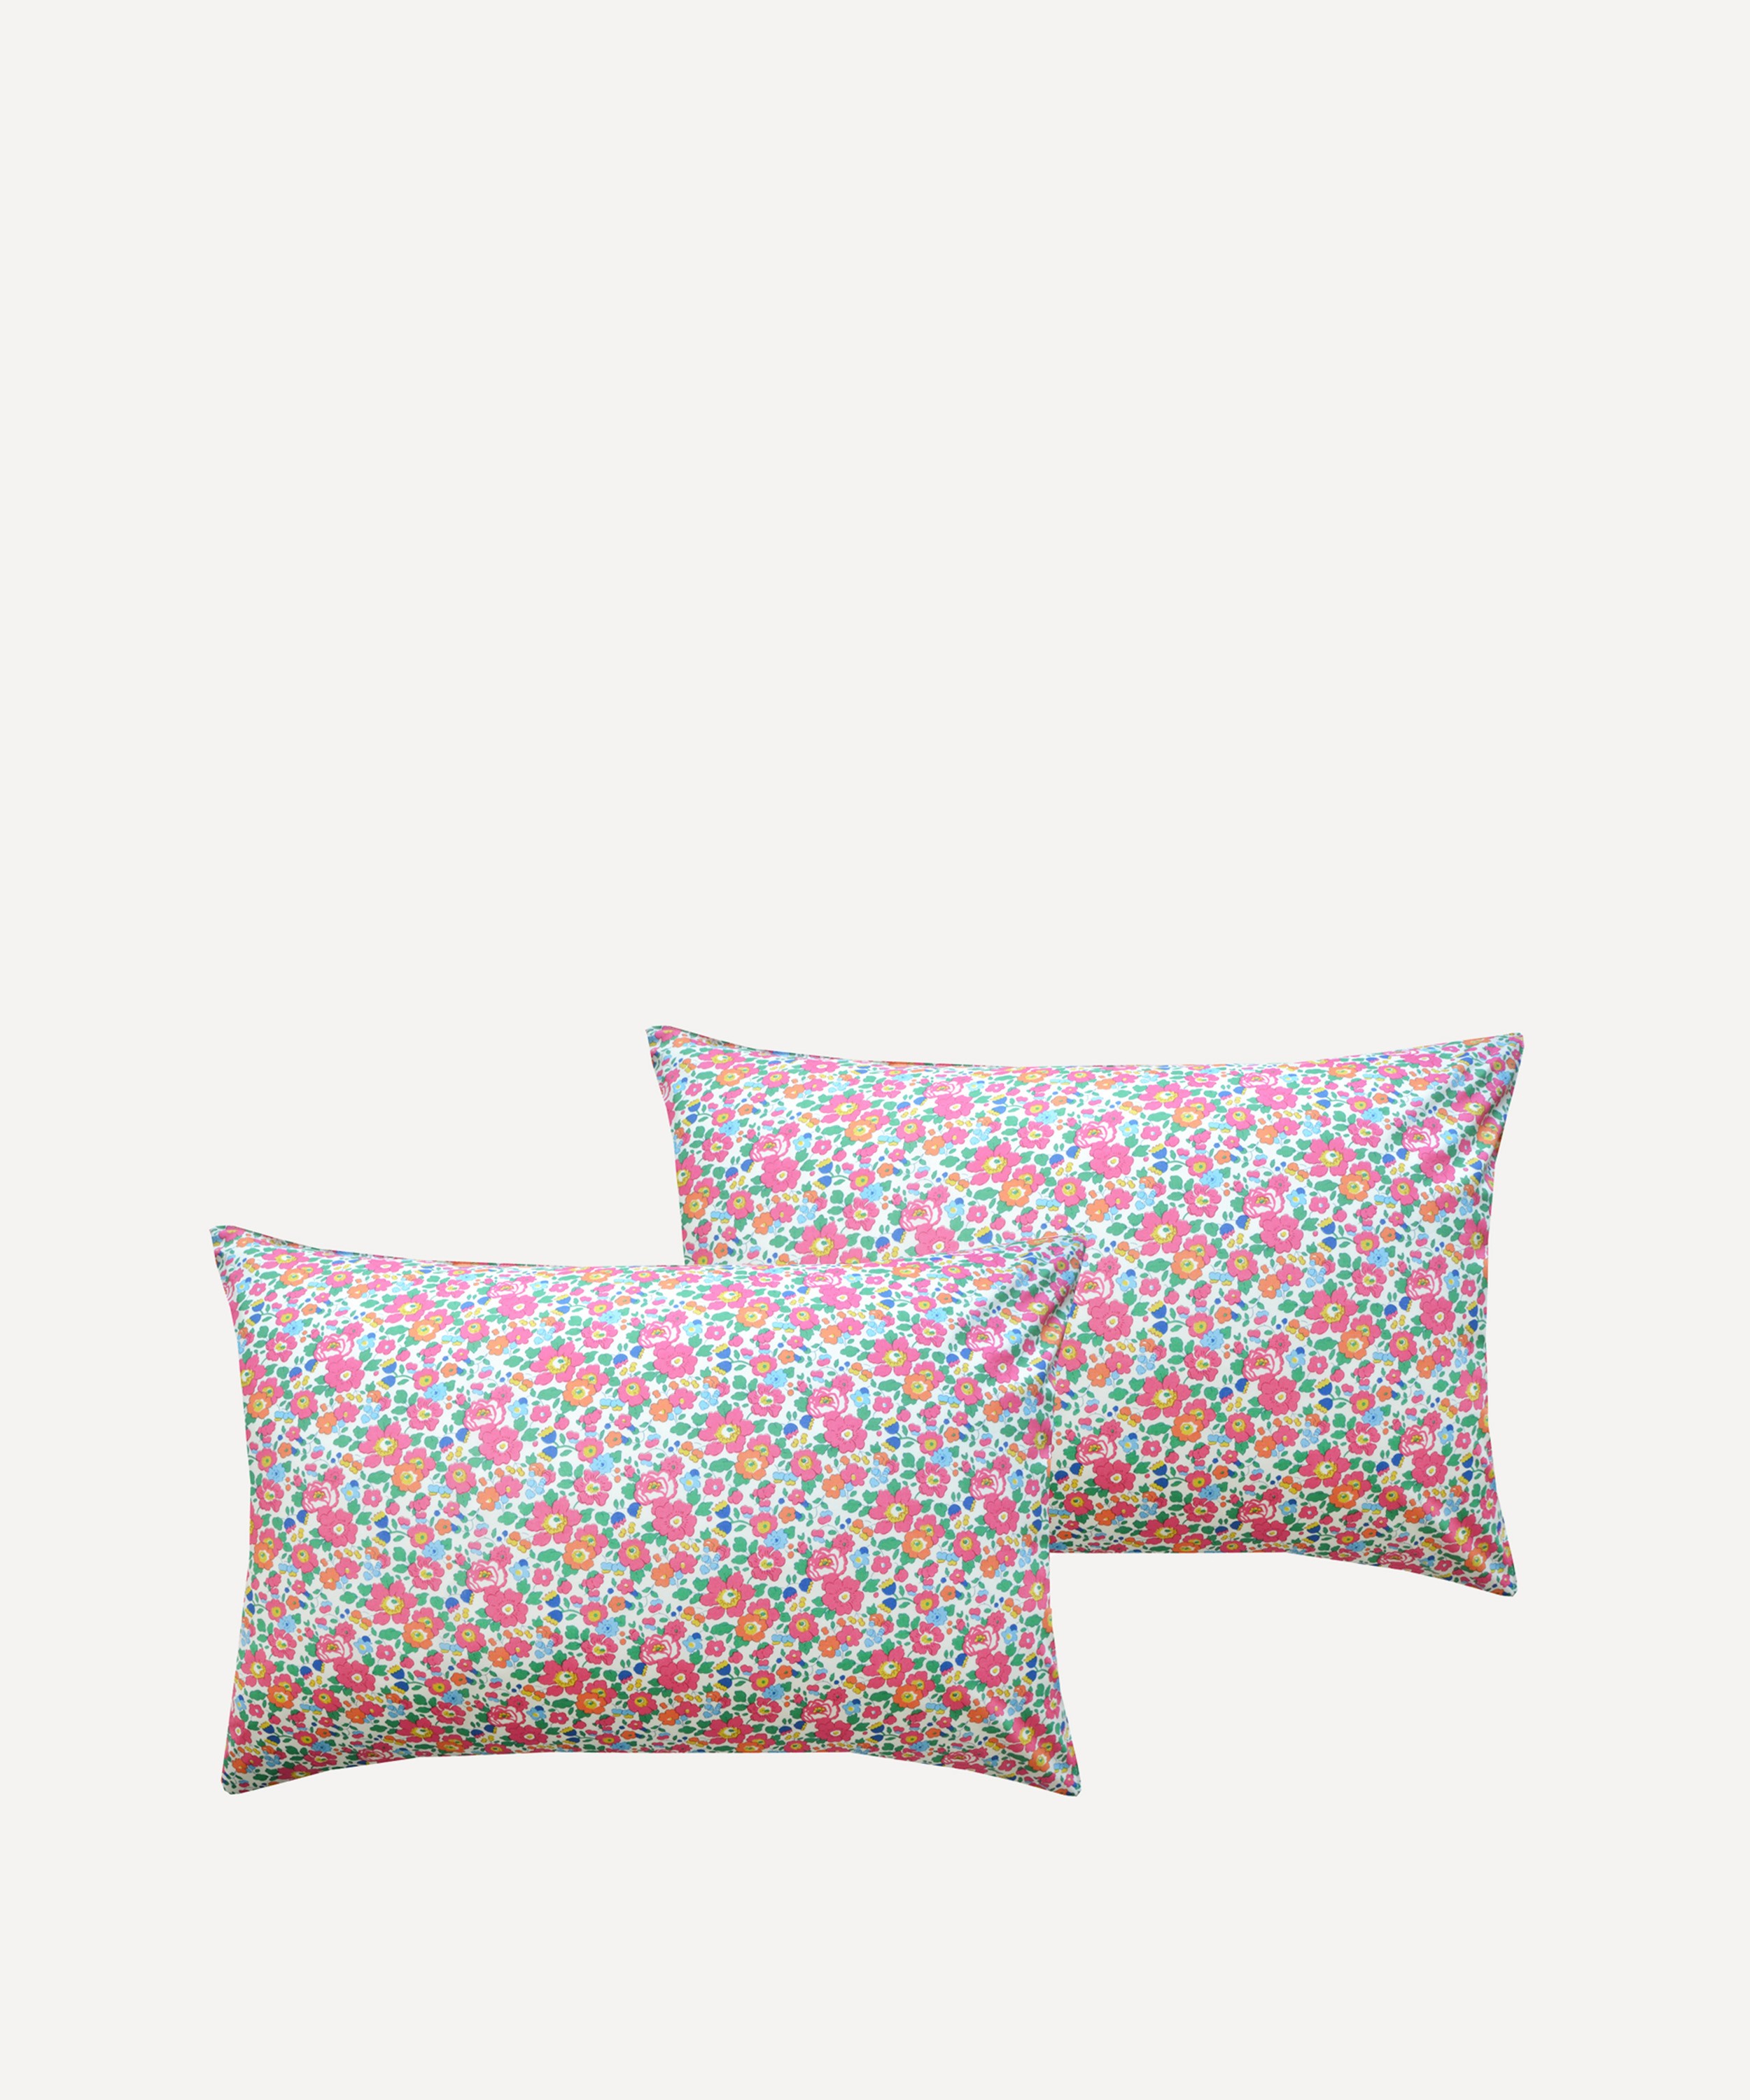 Coco & Wolf - Betsy Deep Pink King Duvet Cover Set image number 3